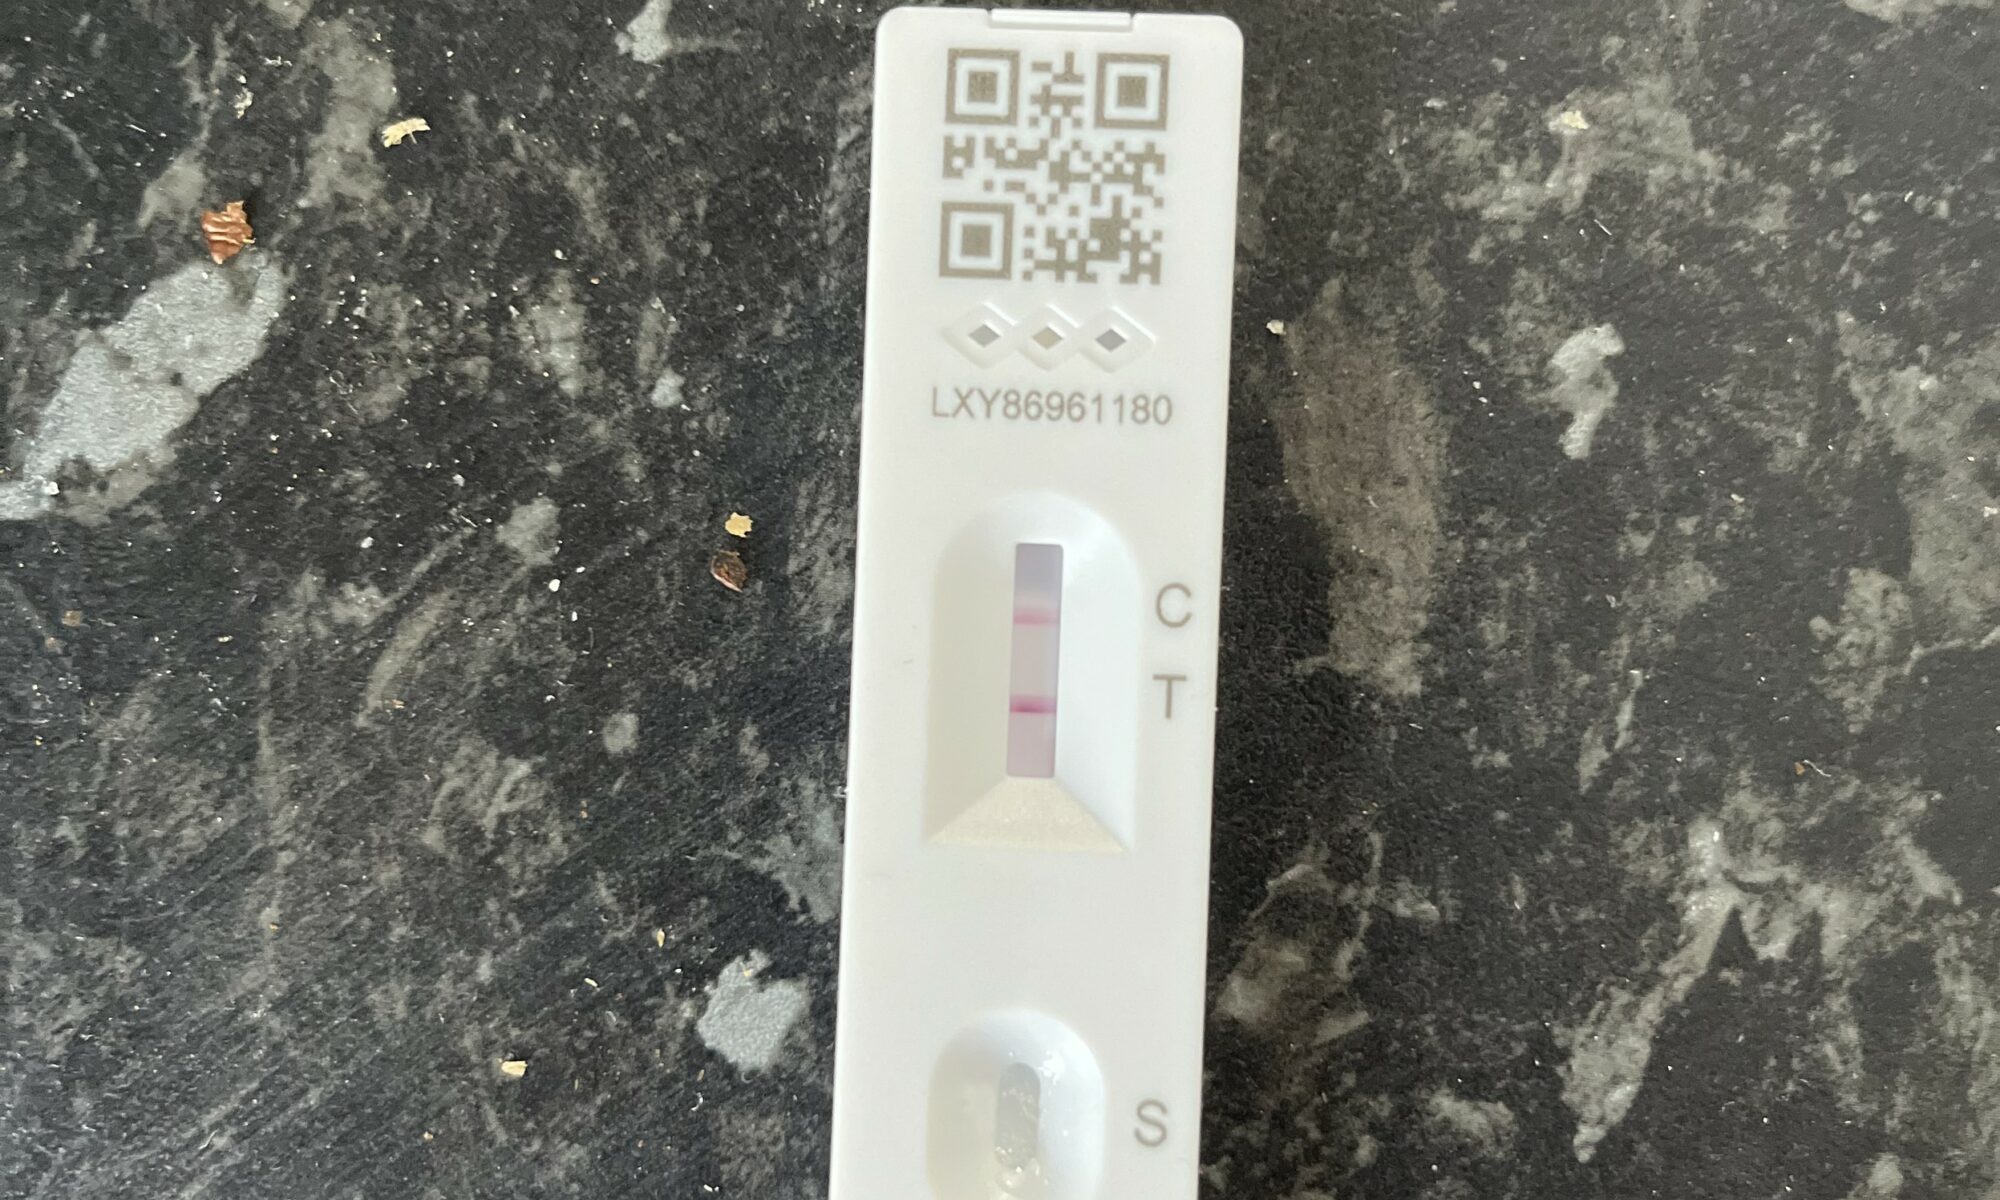 A Covid test showing positive result